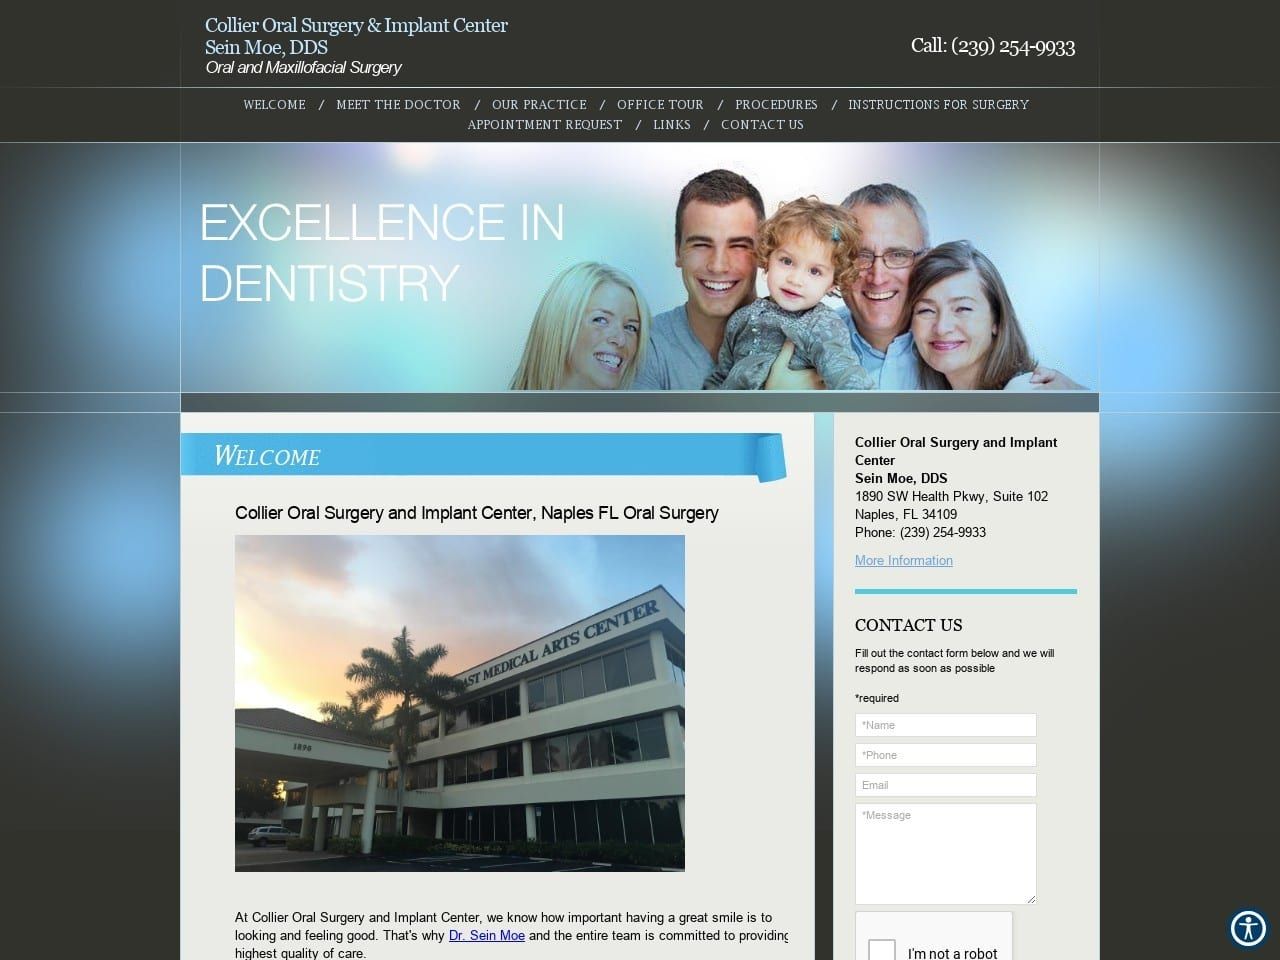 Collier Oral Surgery and Implant Center Website Screenshot from collieroralsurgery.com